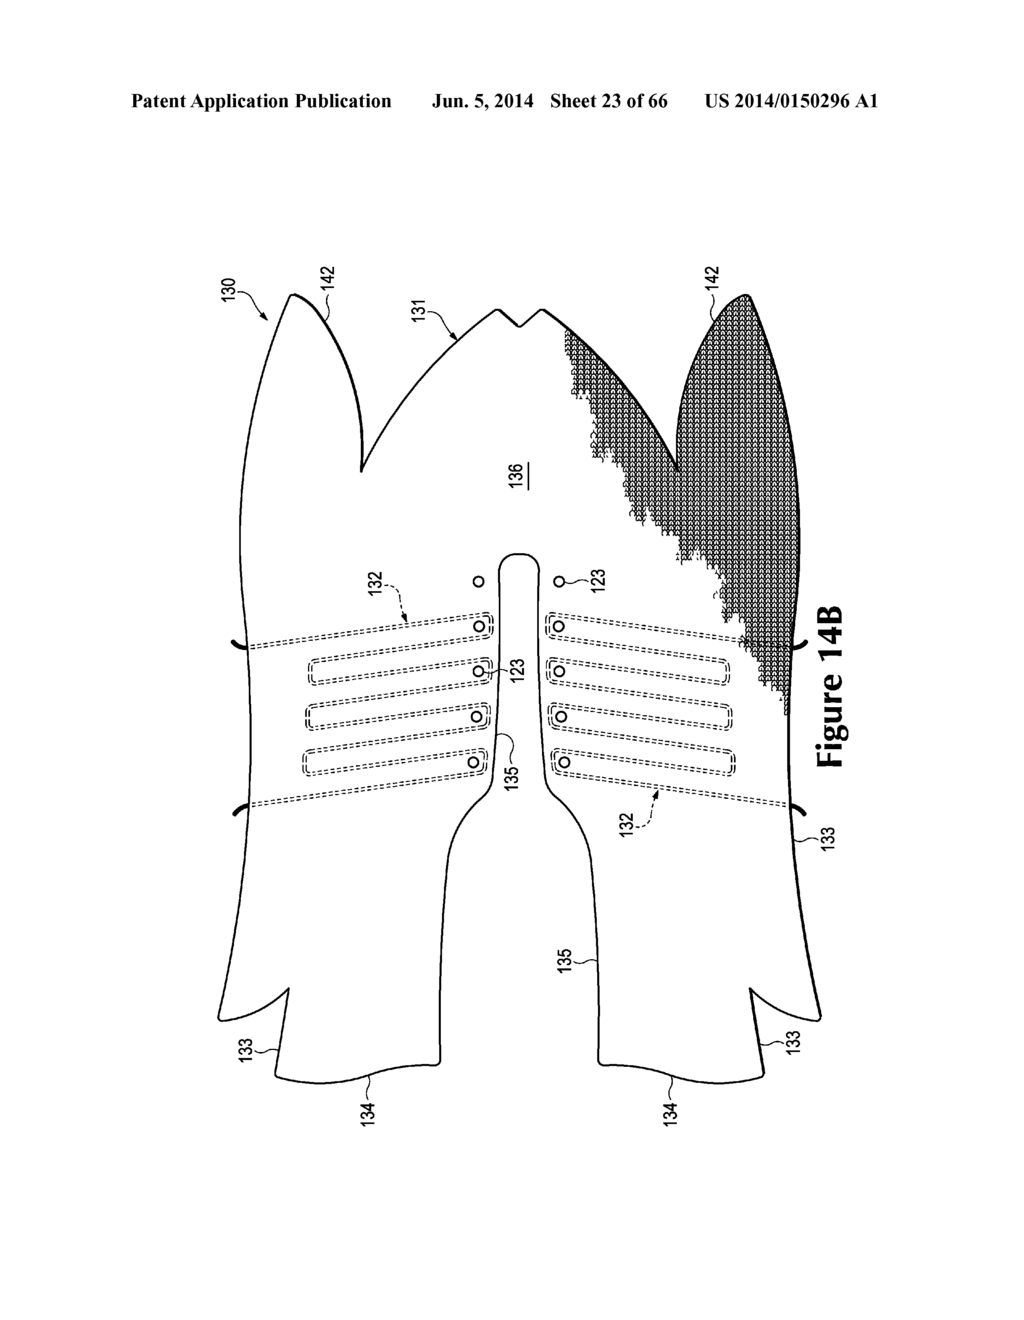 Article Of Footwear Incorporating A Knitted Component With A Tongue - diagram, schematic, and image 24